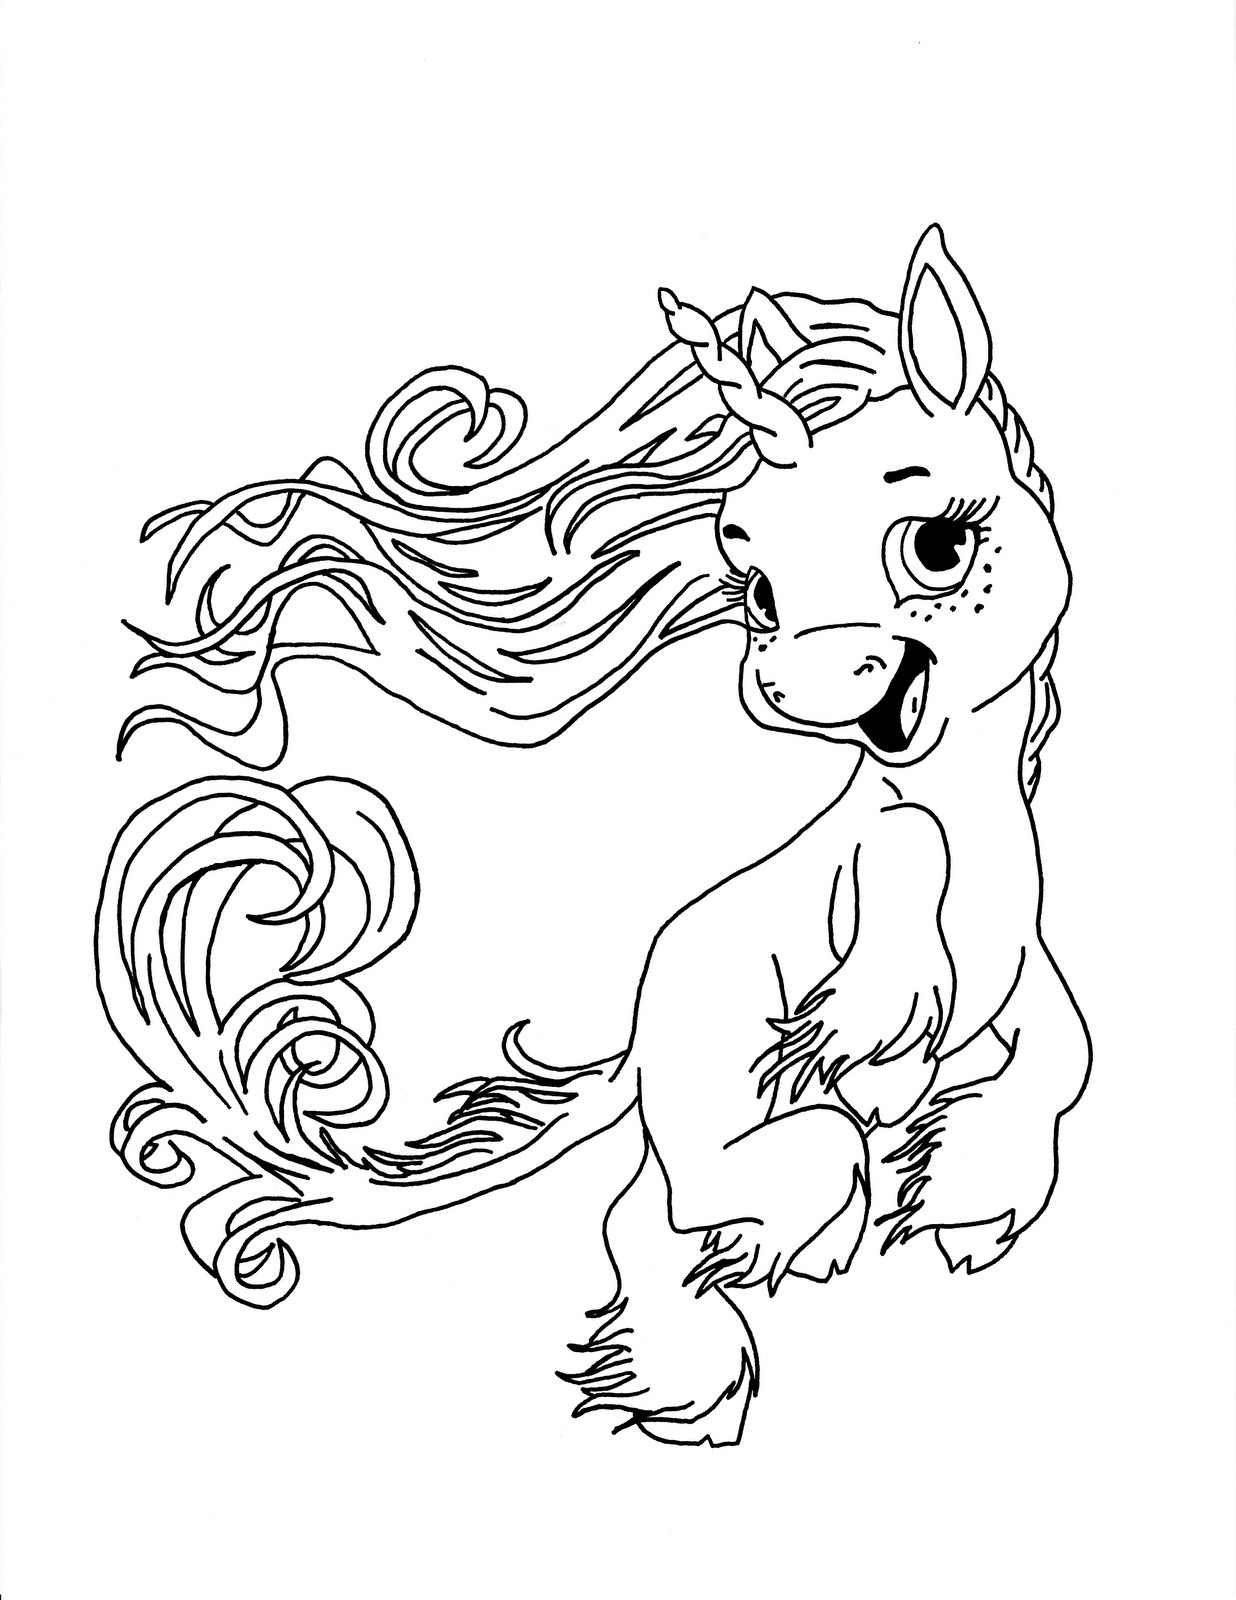 Magical Baby Unicorn Coloring Page   Free Printable Coloring Pages ...